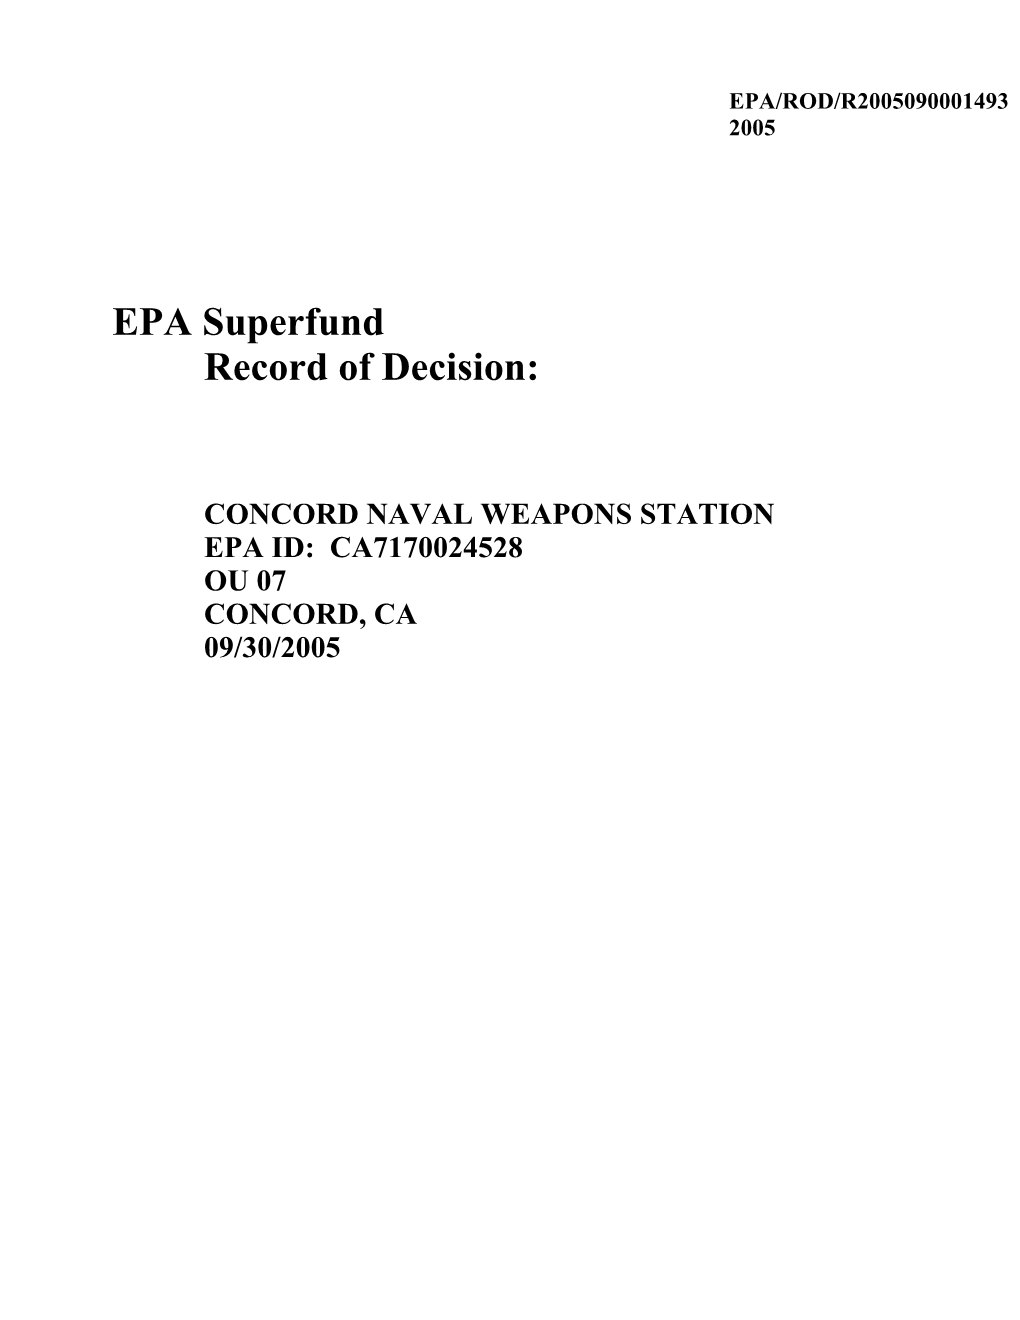 Concord Naval Weapons Station Epa Id